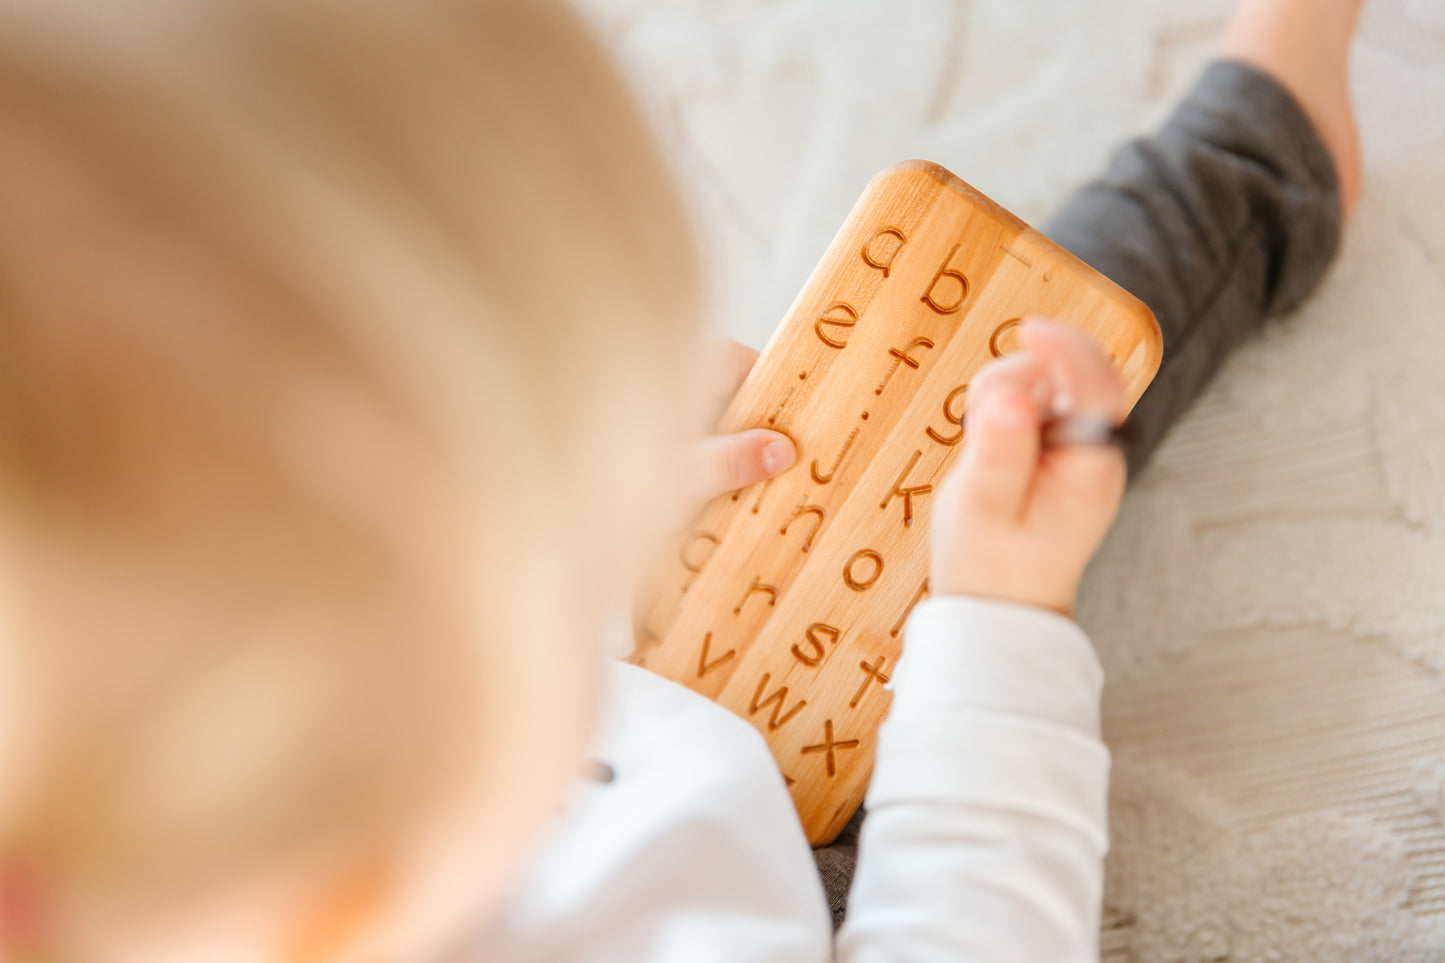 Sweet baby boy thoroughly enjoying the wooden toy iDoddle, using its features to trace and practice writing the ABC. His playtime with this educational and tactile toy fosters early learning and enhances his fine motor skills as he explores the world of letters and creativity.